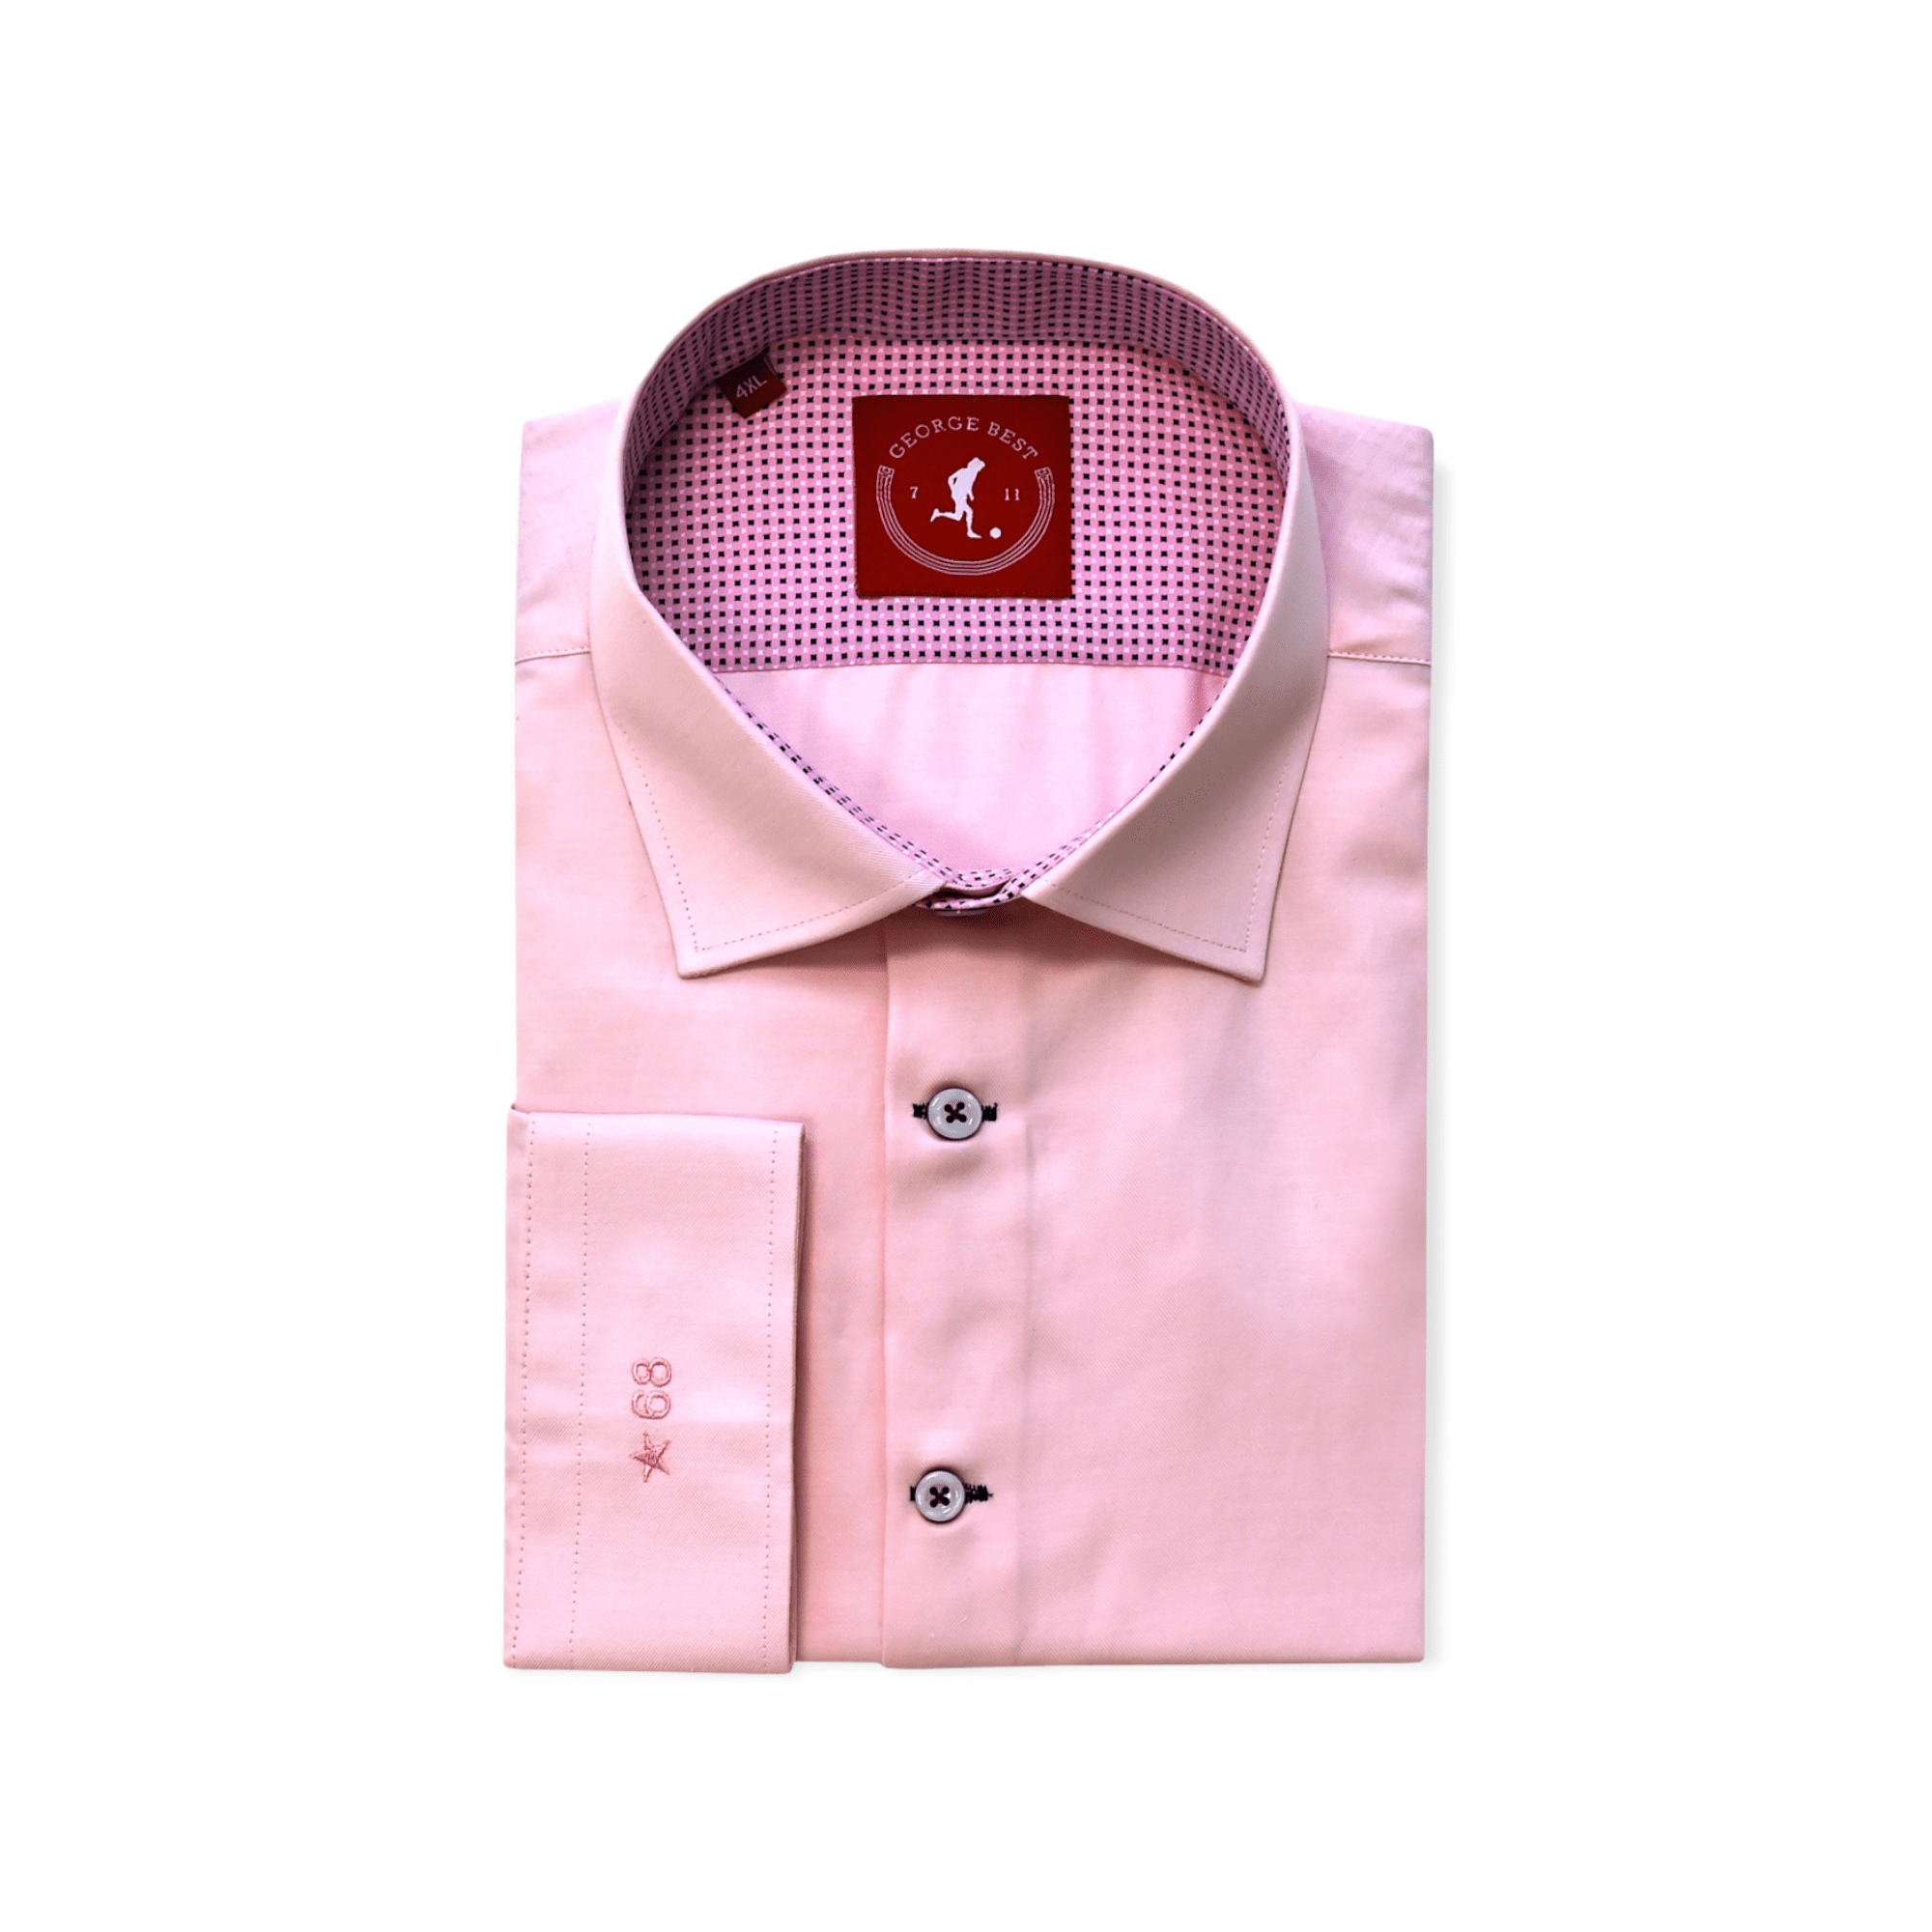 Tailored Fit Pink Shirt With Cross Print